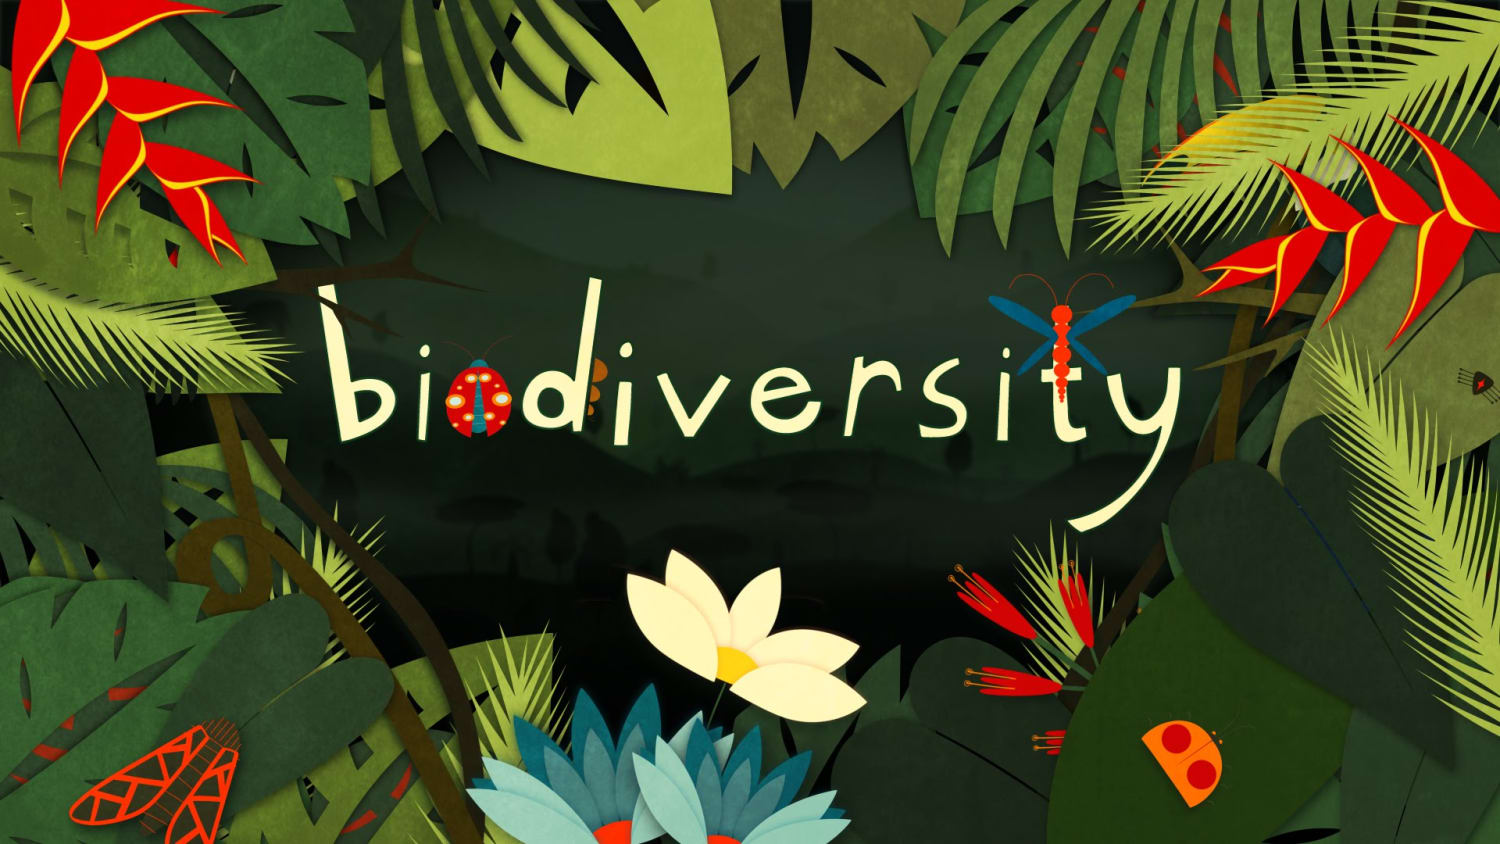 Why is biodiversity so important? | The Kid Should See This